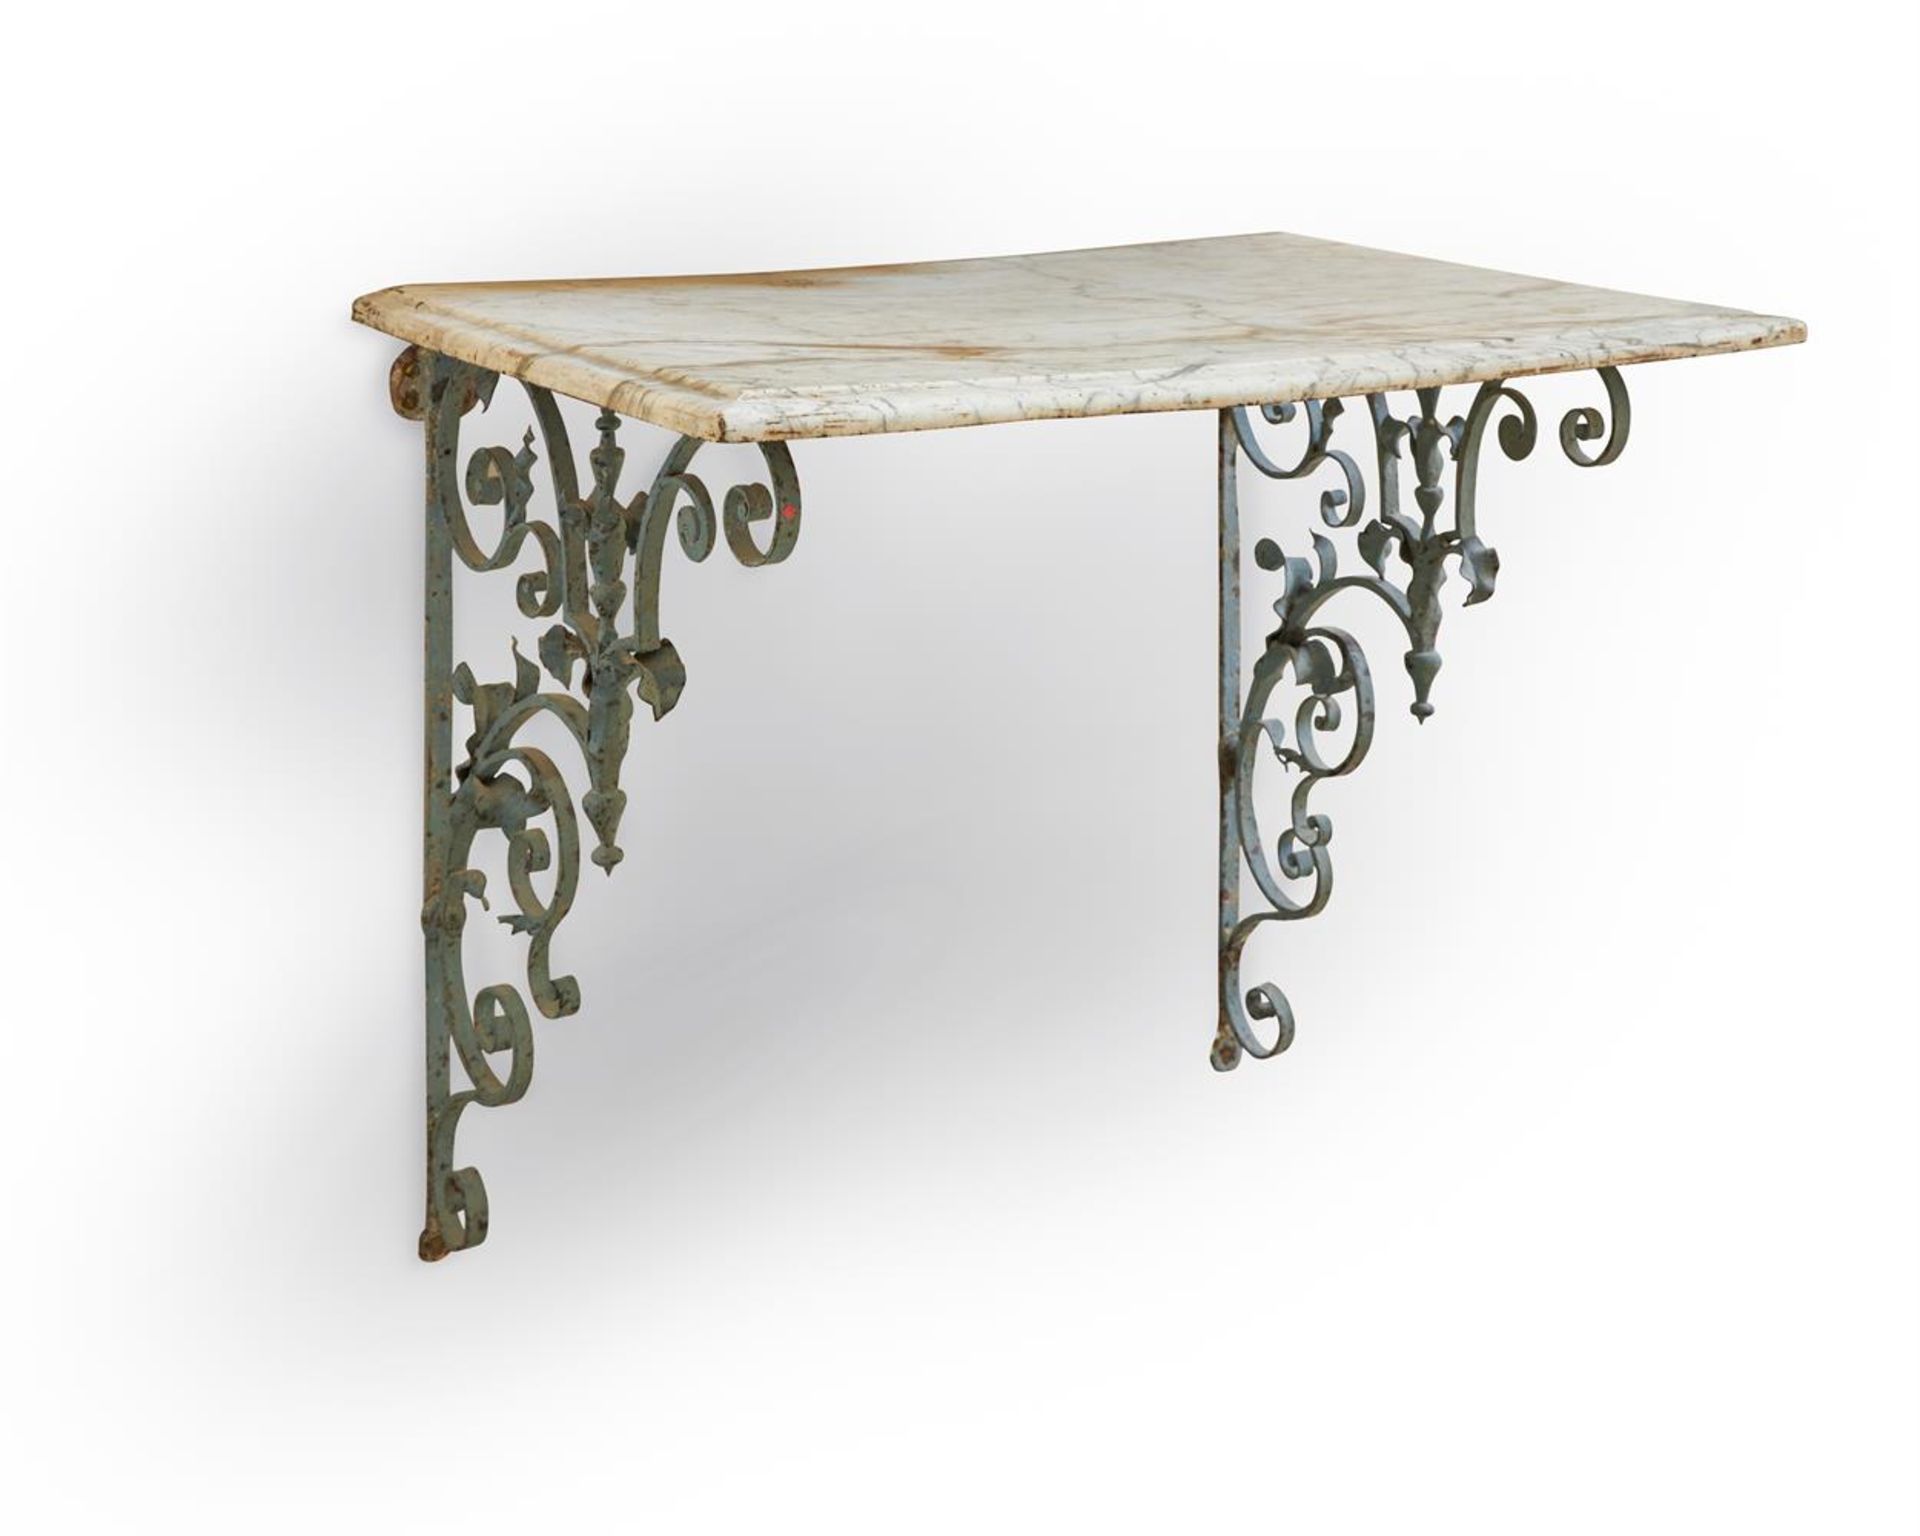 A GREY PAINTED WROUGHT IRON AND MARBLE CONSOLE TABLE, 19TH CENTURY - Image 3 of 5